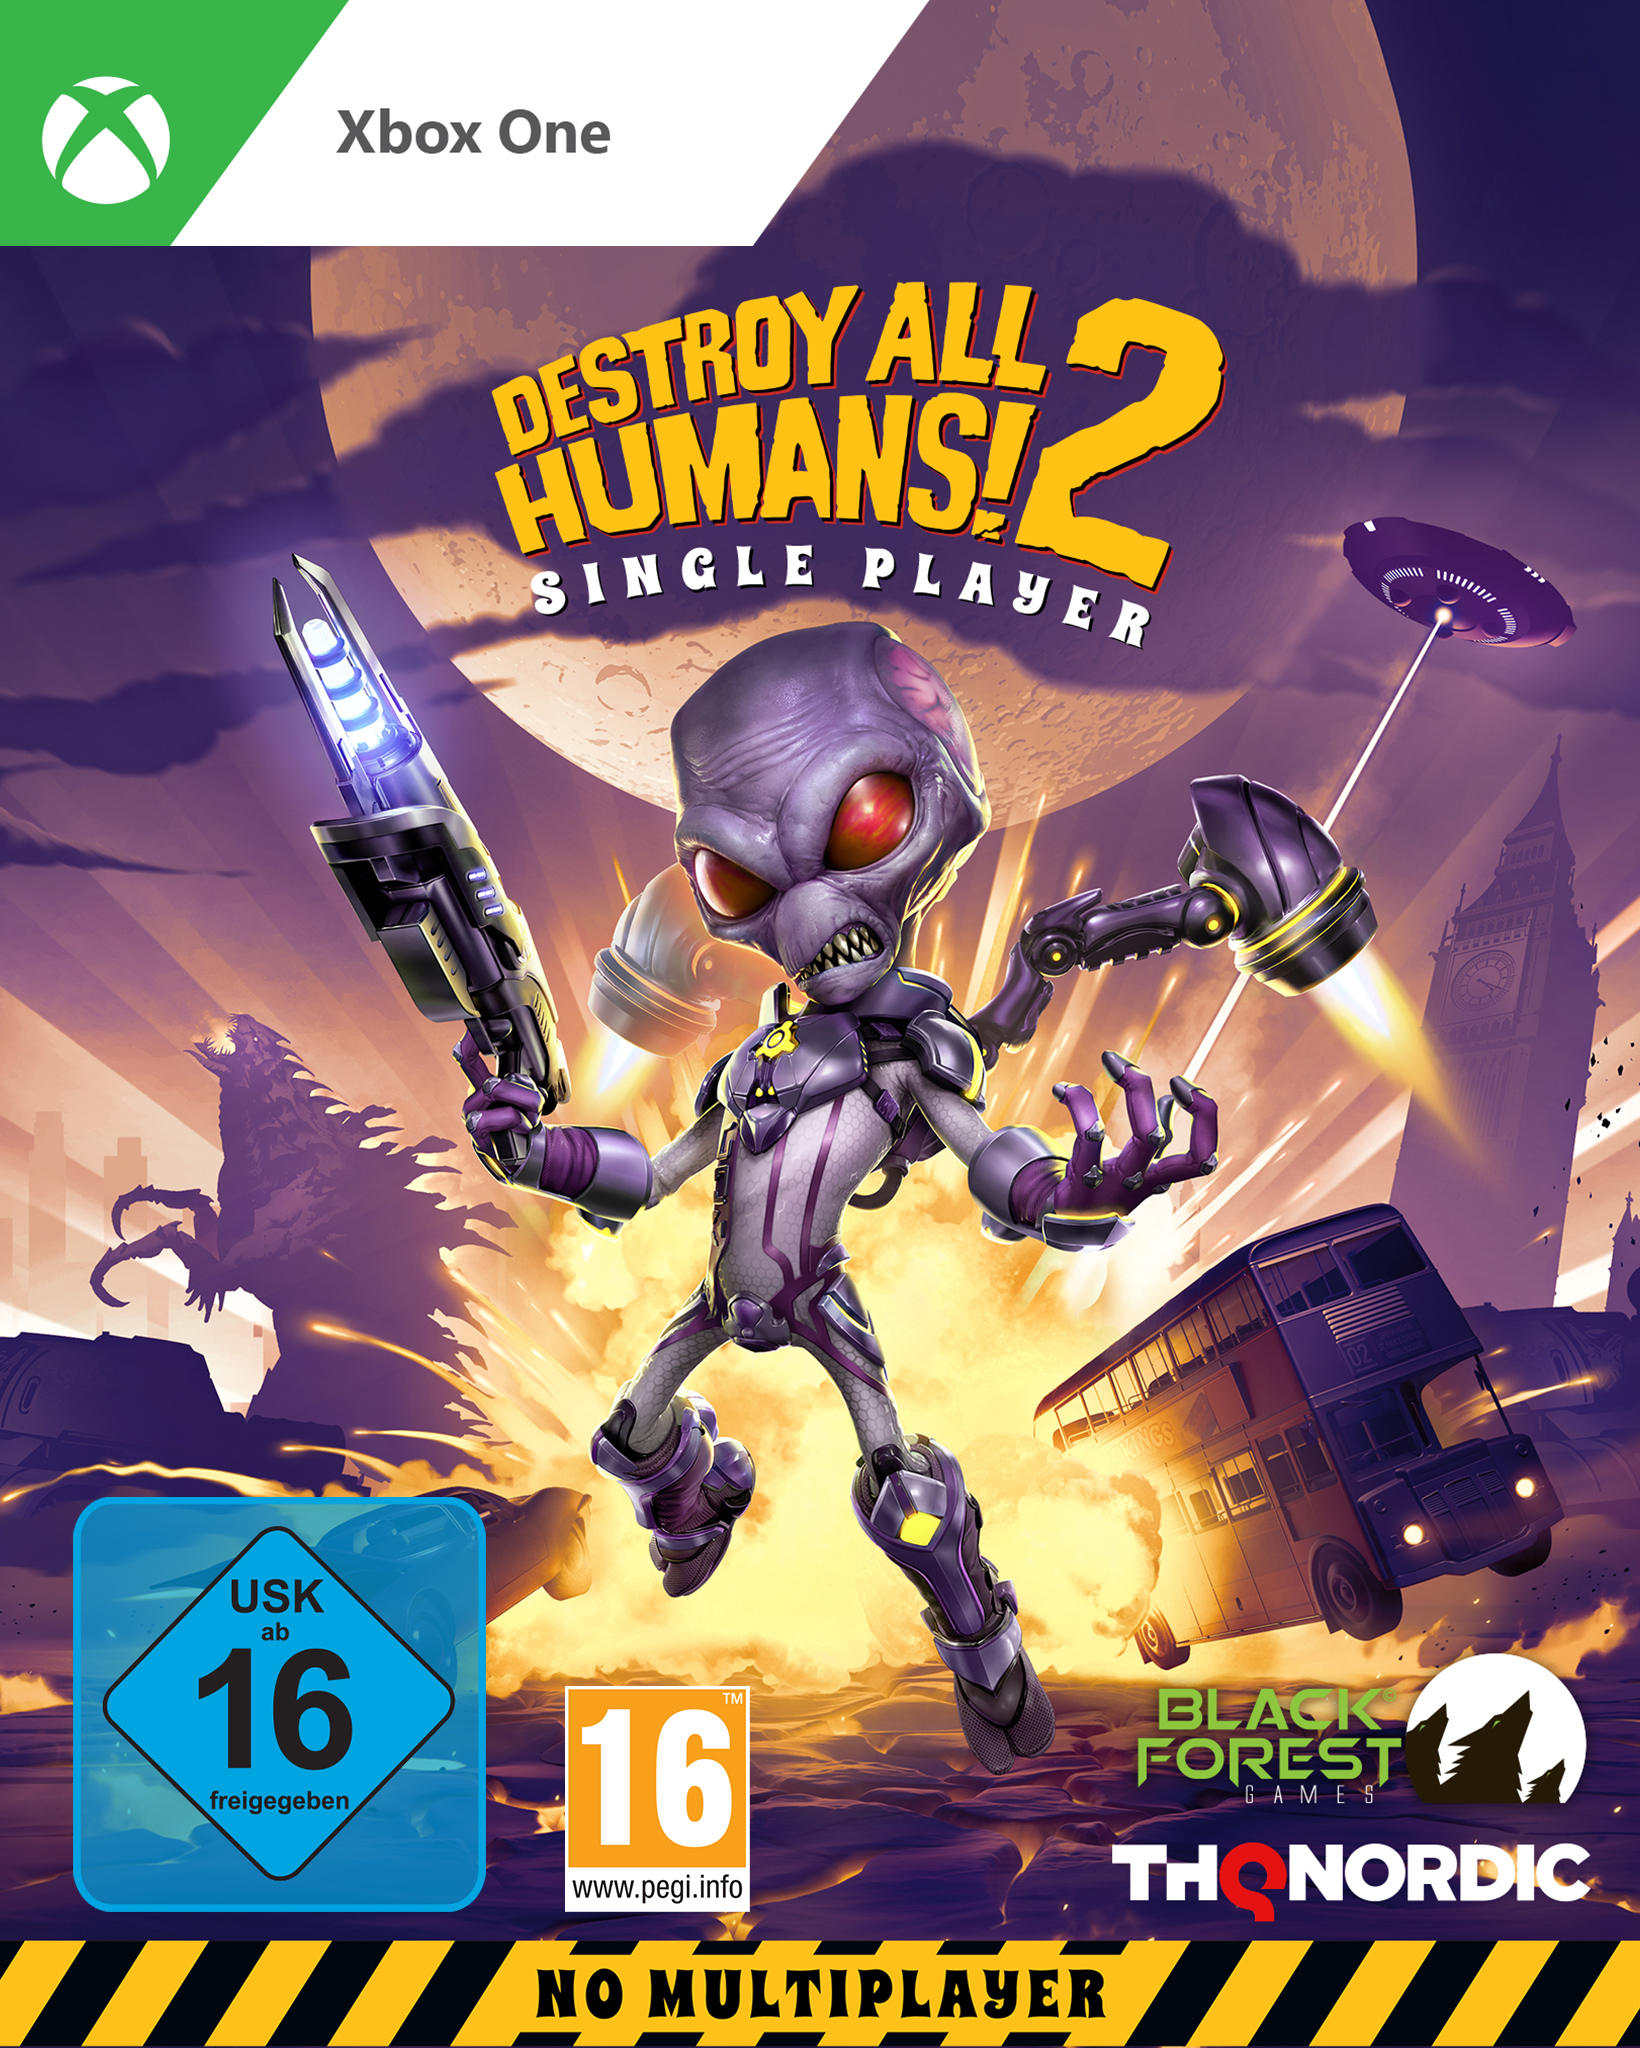 REPROBED ALL 2 [Xbox HUMANS One] - XBO DESTROY -